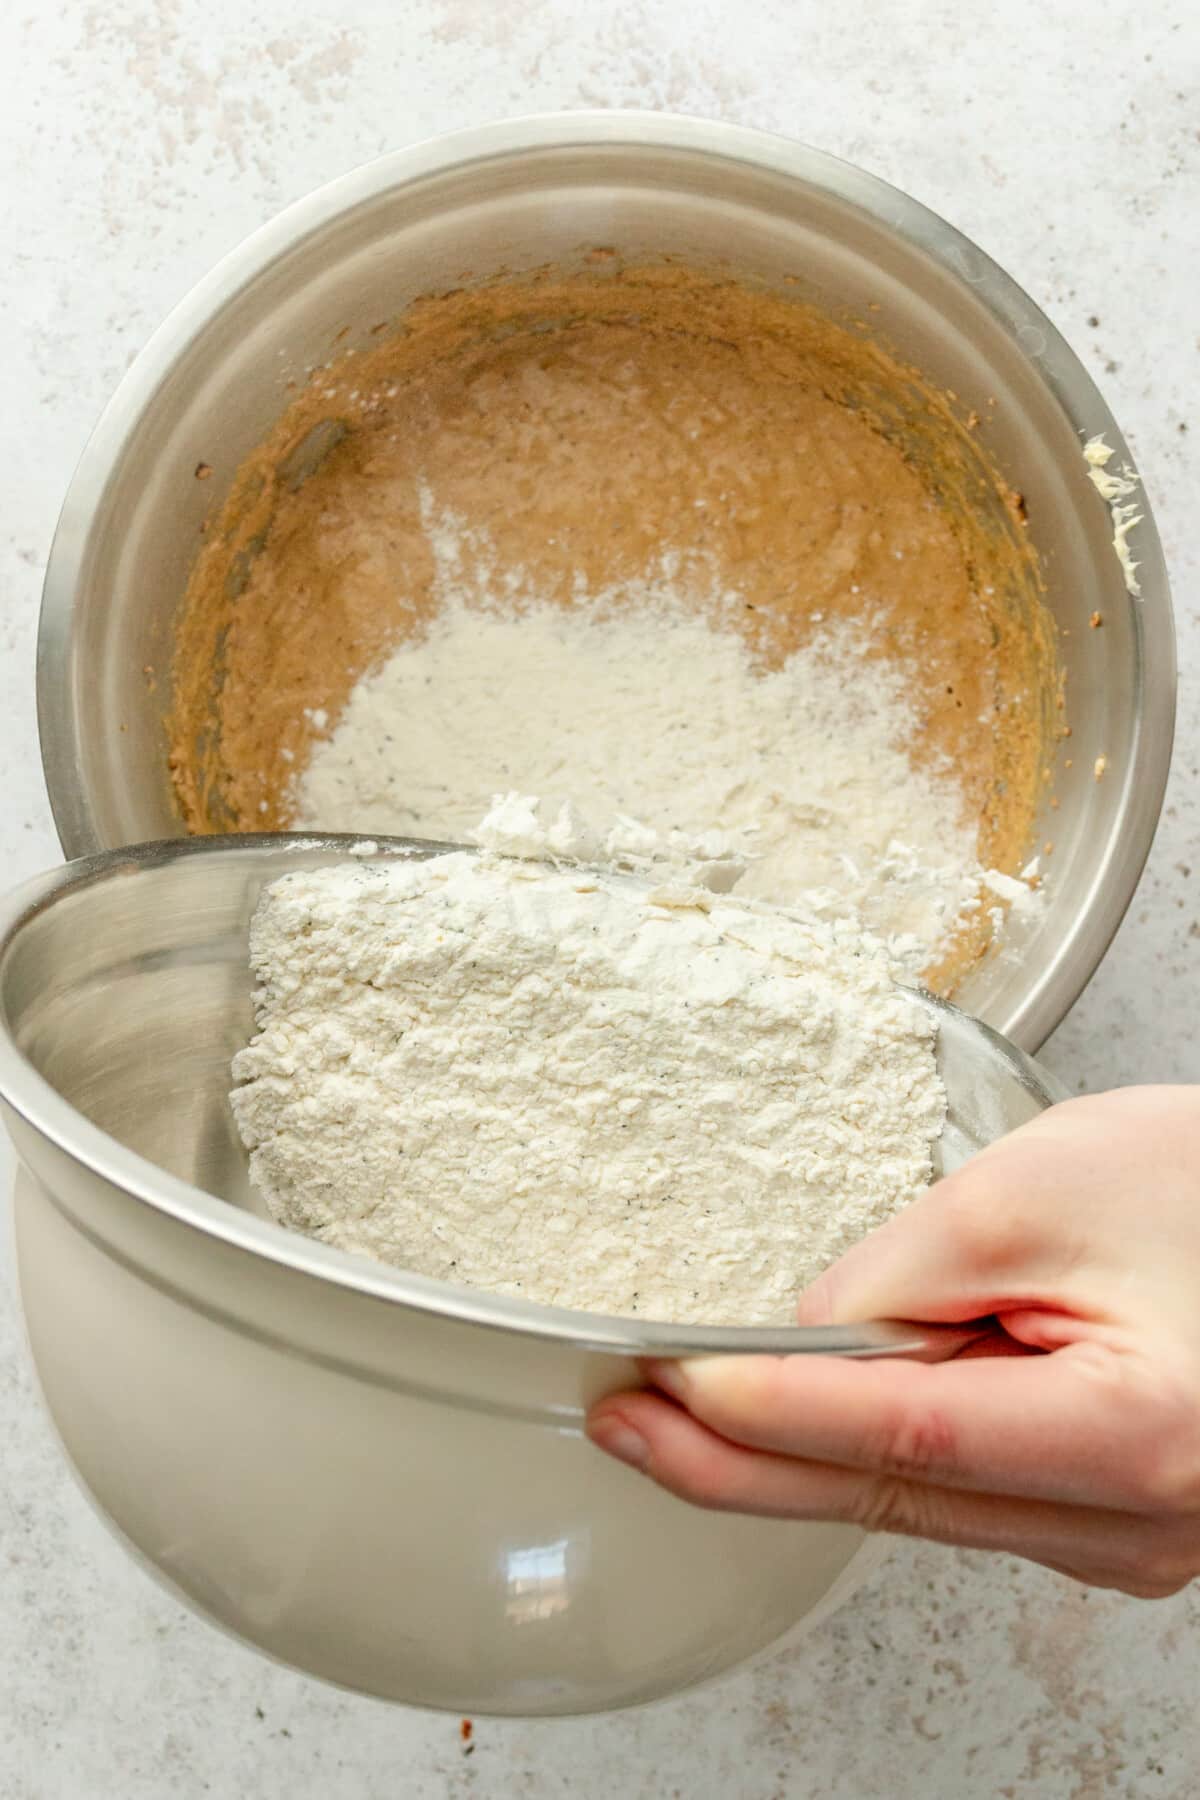 A mixture of dry ingredients are added to a whipped butter, sugar and egg mixture in a stainless steel bowl on a light grey surface.